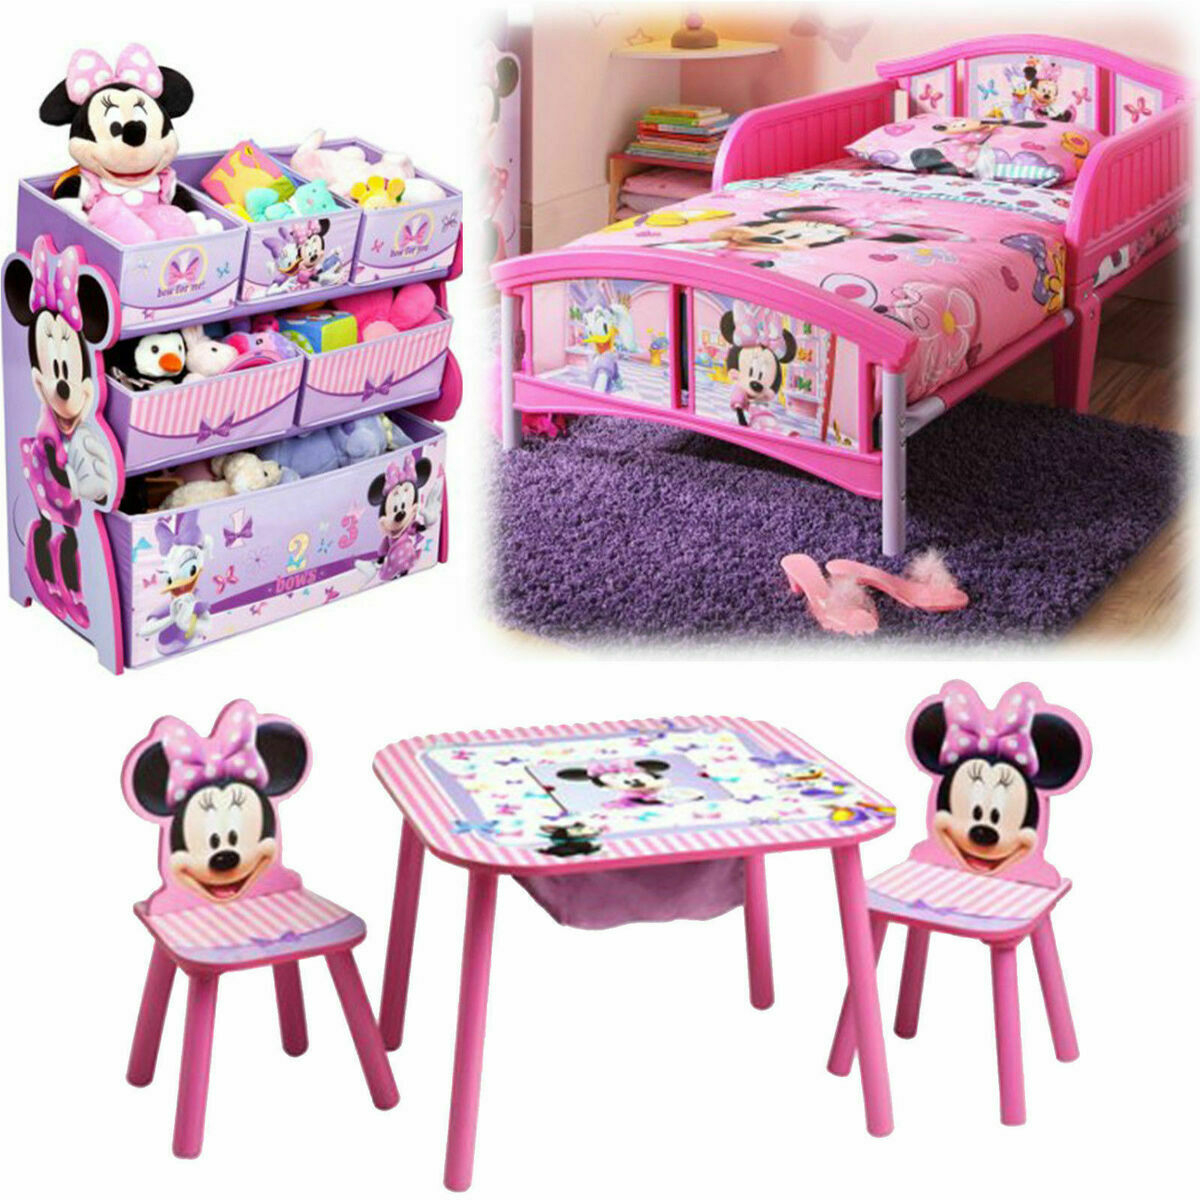 Girl Bedroom Furniture Set Toy Organizer Kid Child Toddler Bed Table Chairs throughout size 1200 X 1200